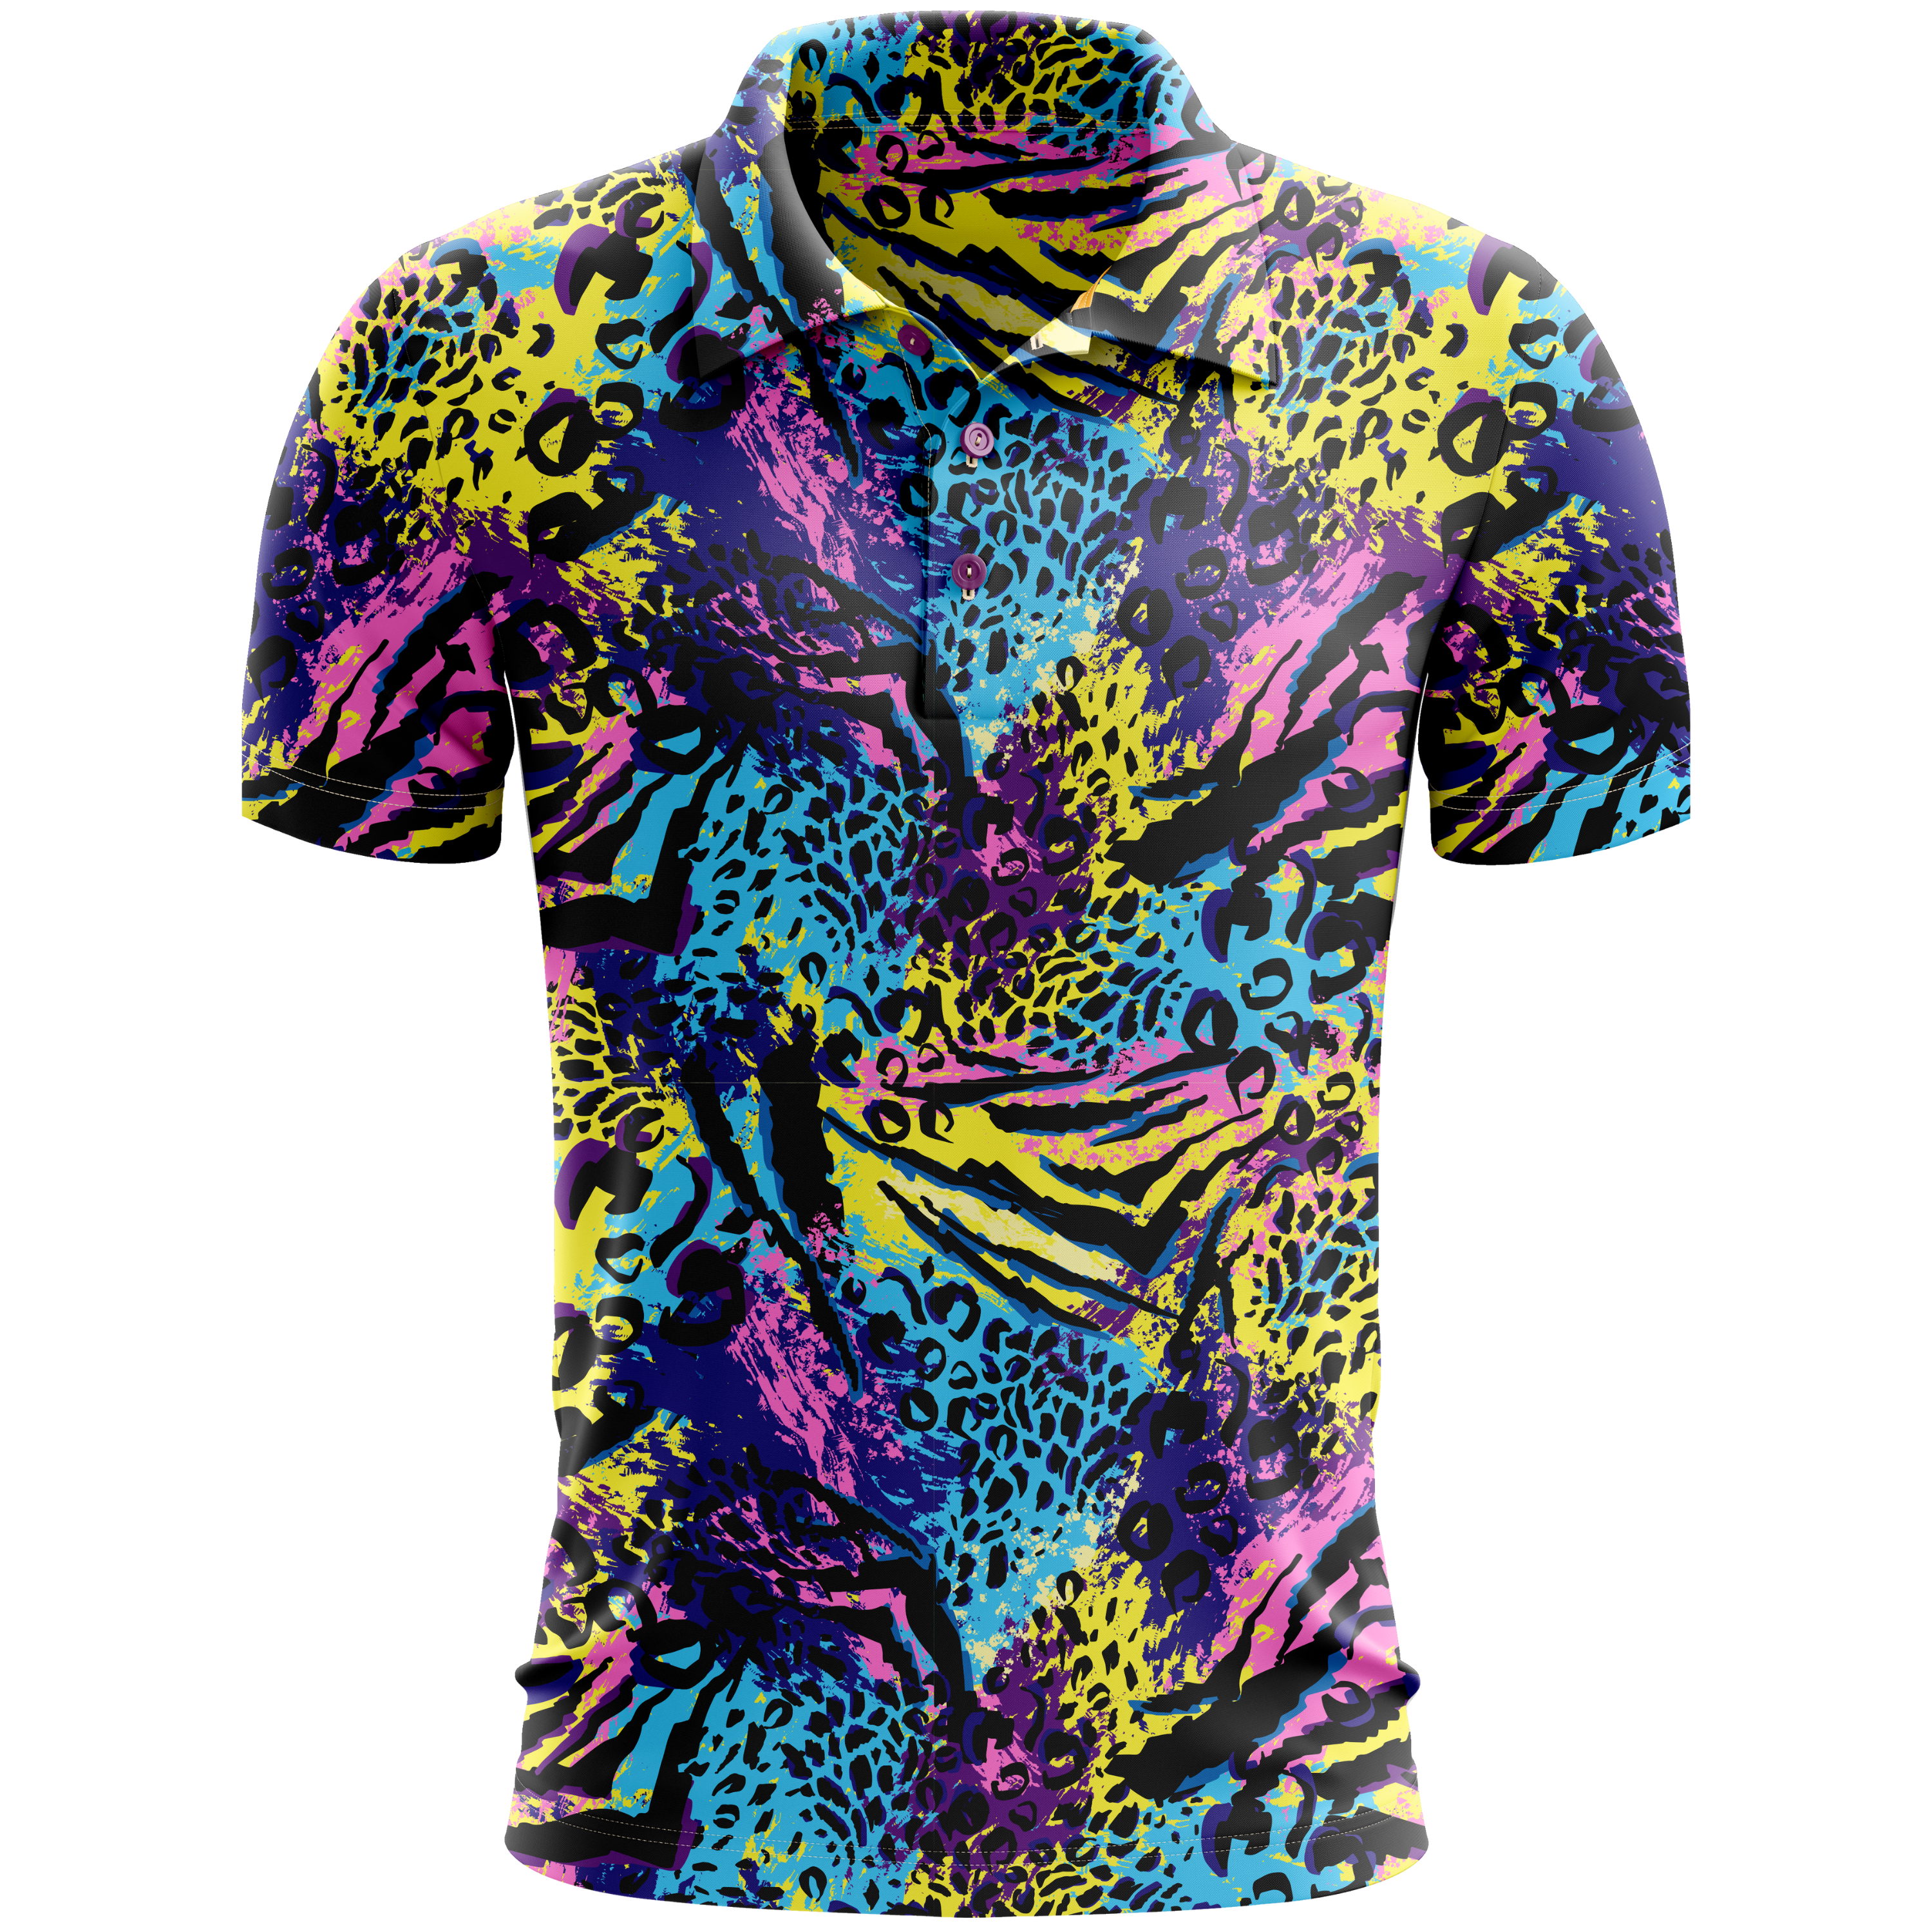 Wild Thing  Bright/Loud 80's Animal Print Style Golf Polo for Men – Lofty  Llama Golf Polos and Shirts